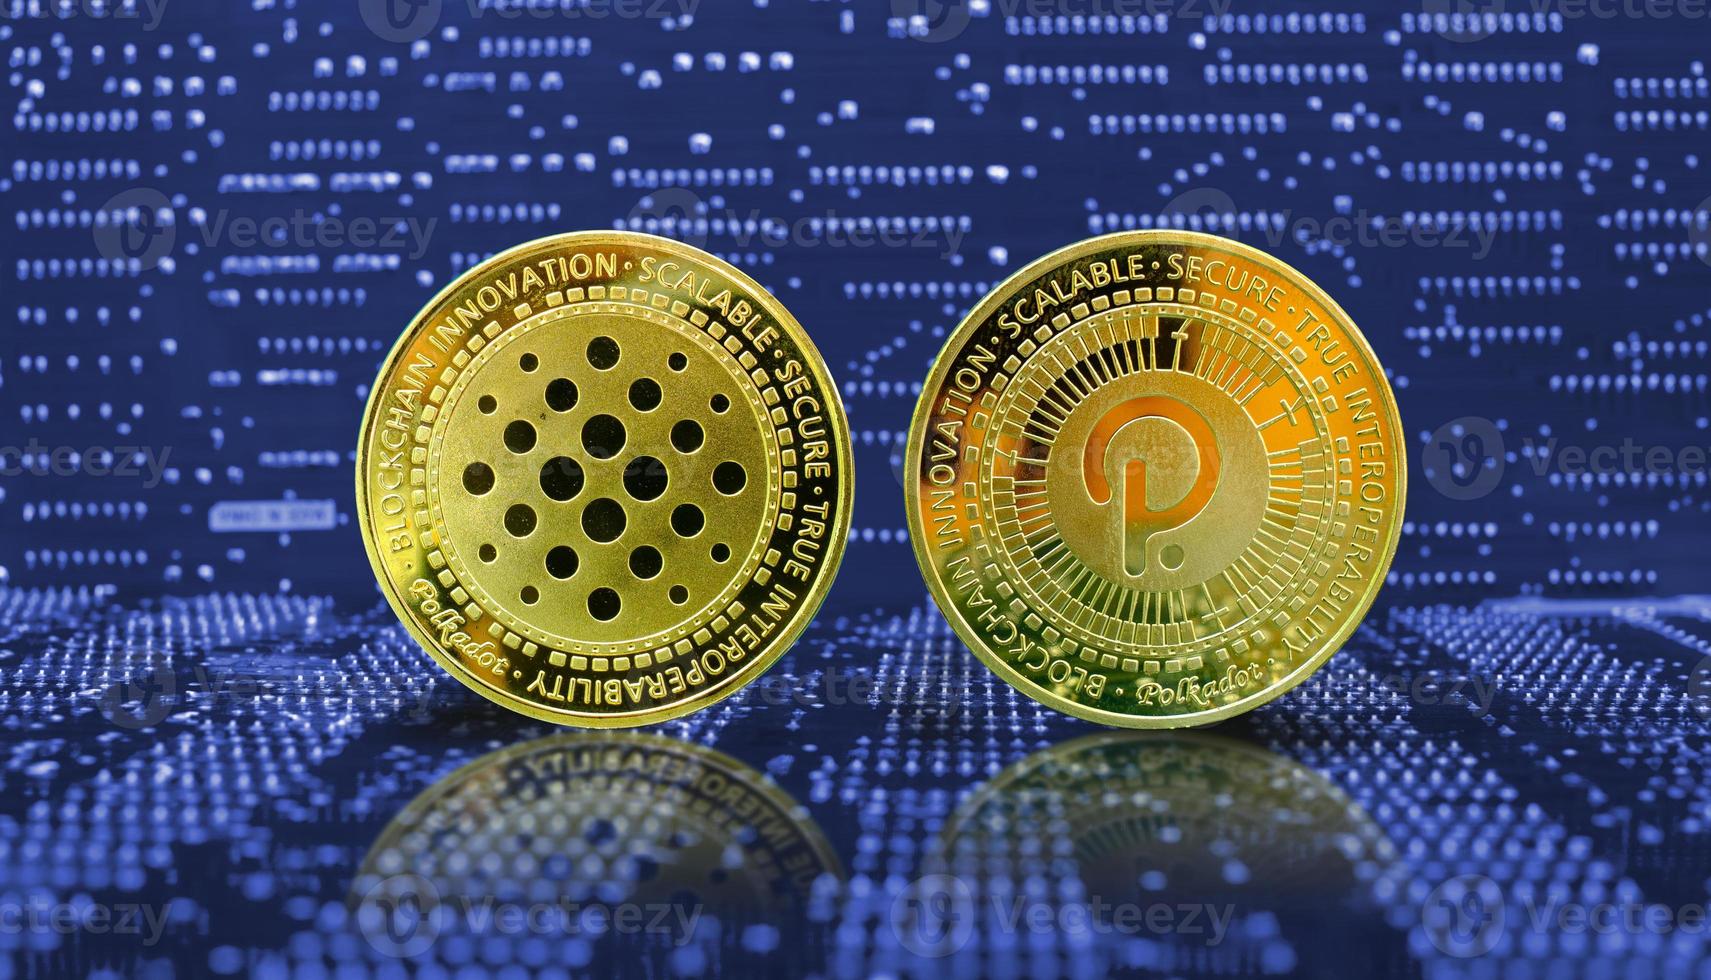 Does Polkadot coin have a future?